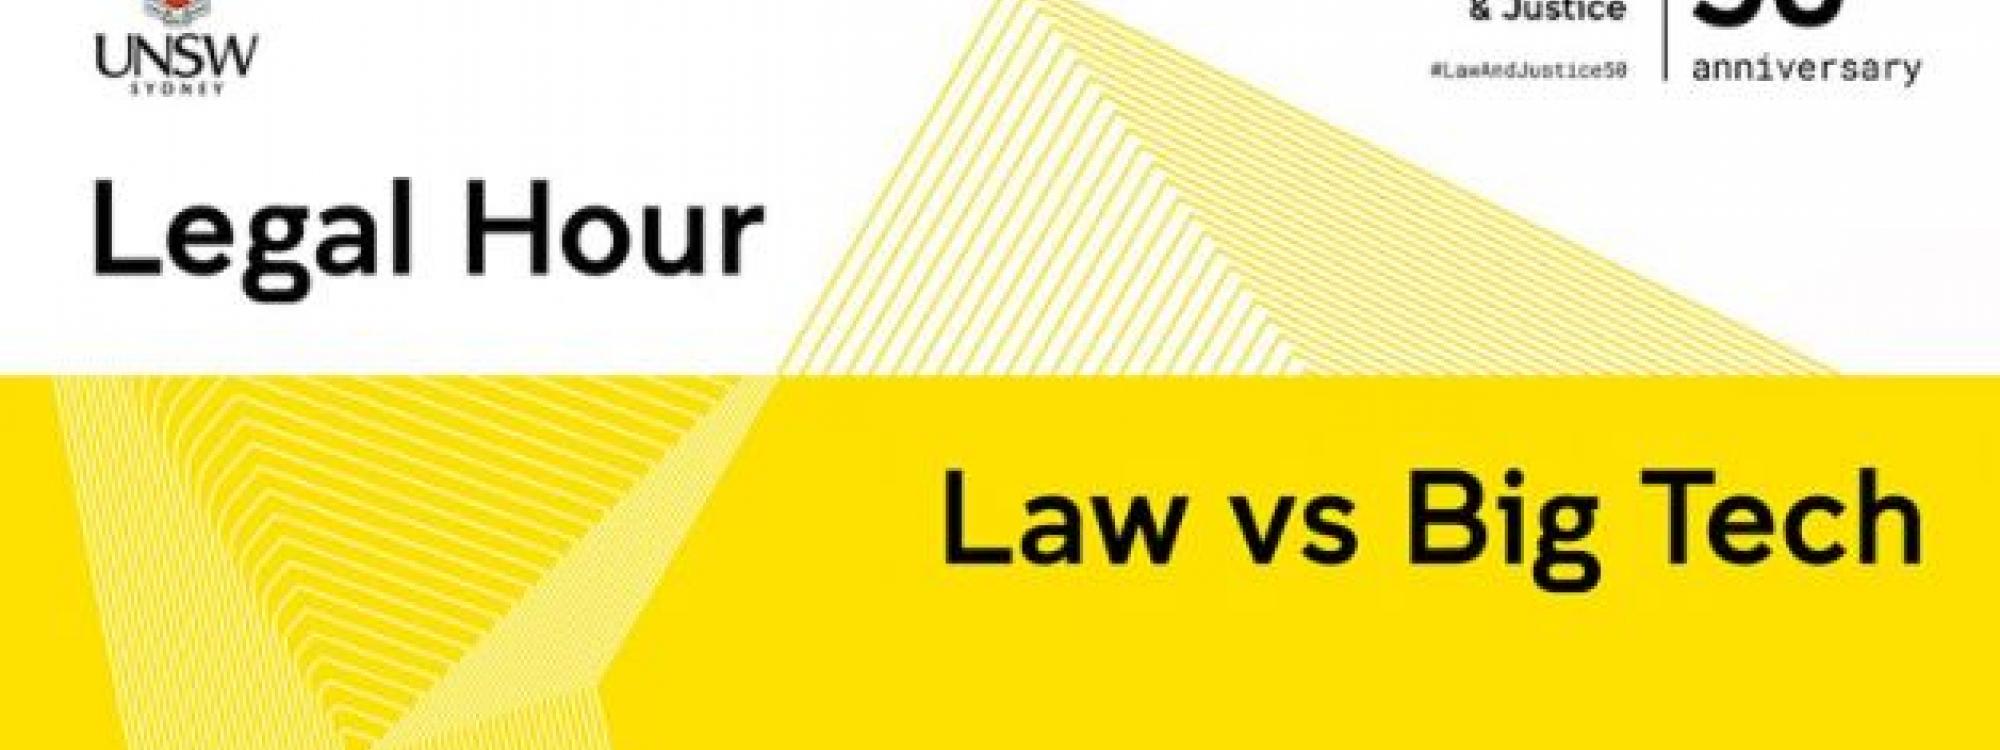 Yellow banner of Legal Hour - law vs big Tech